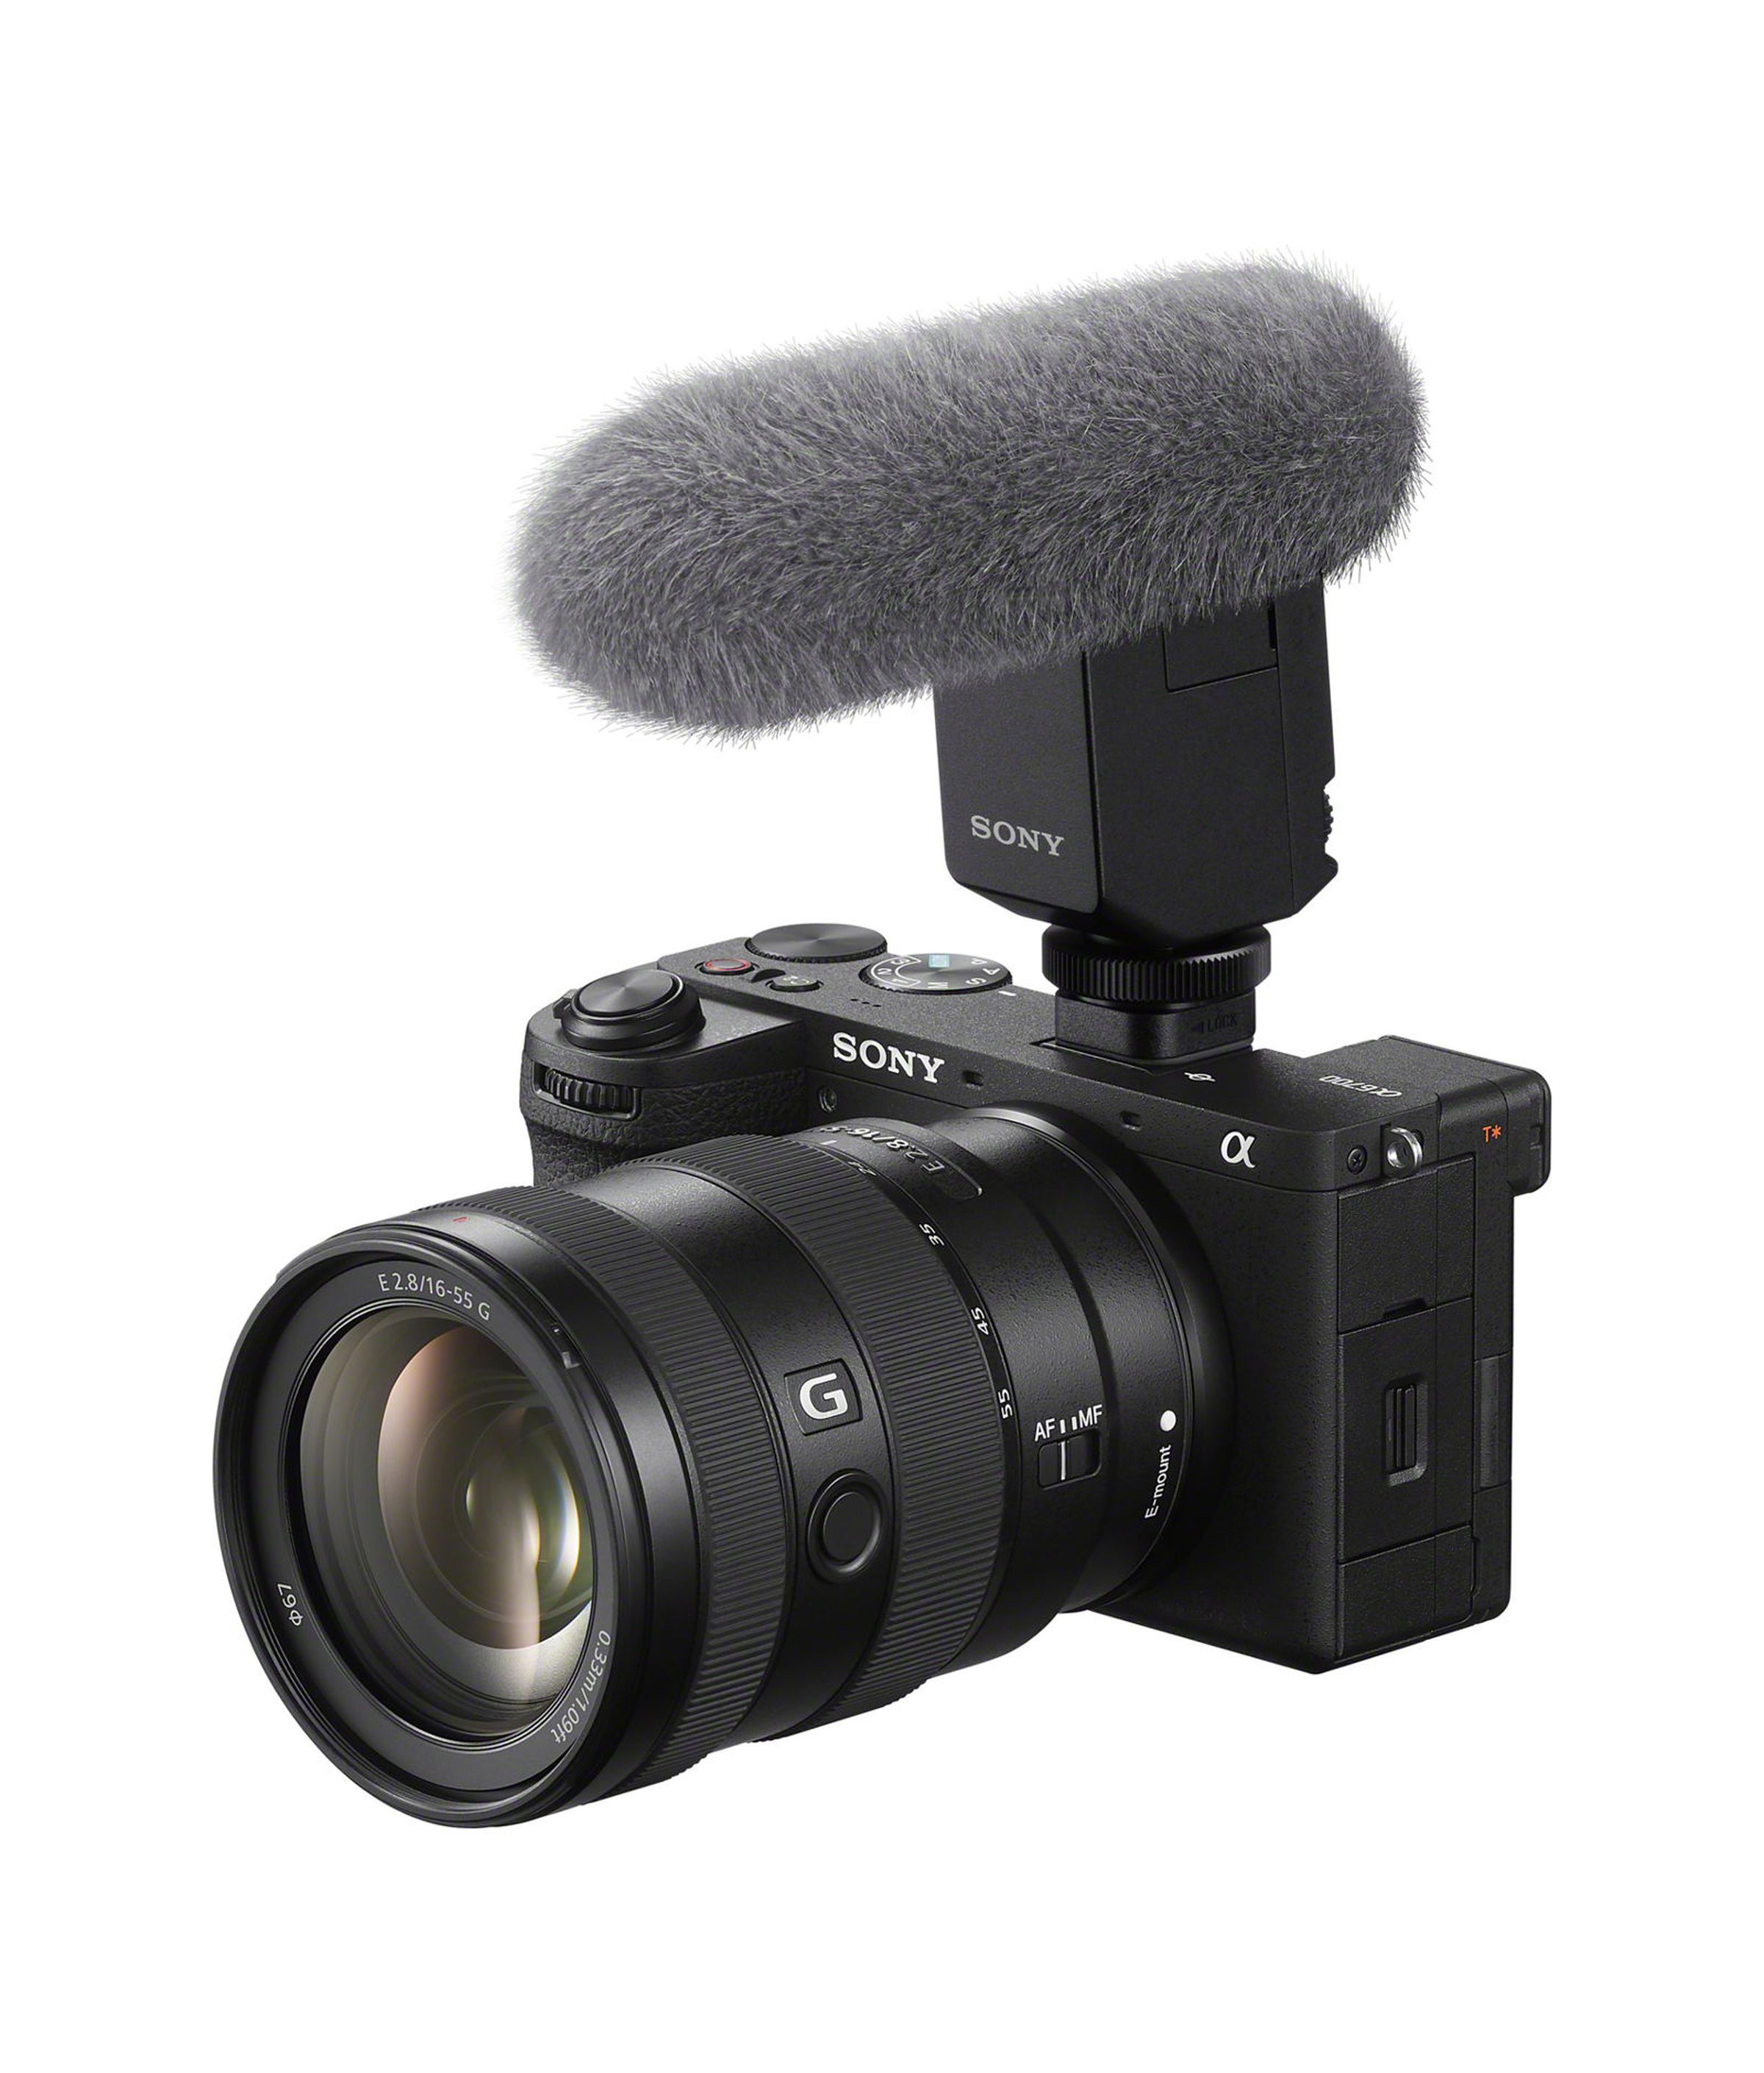 Three quarter view of the Sony A6700 with a microphone attachment on the top